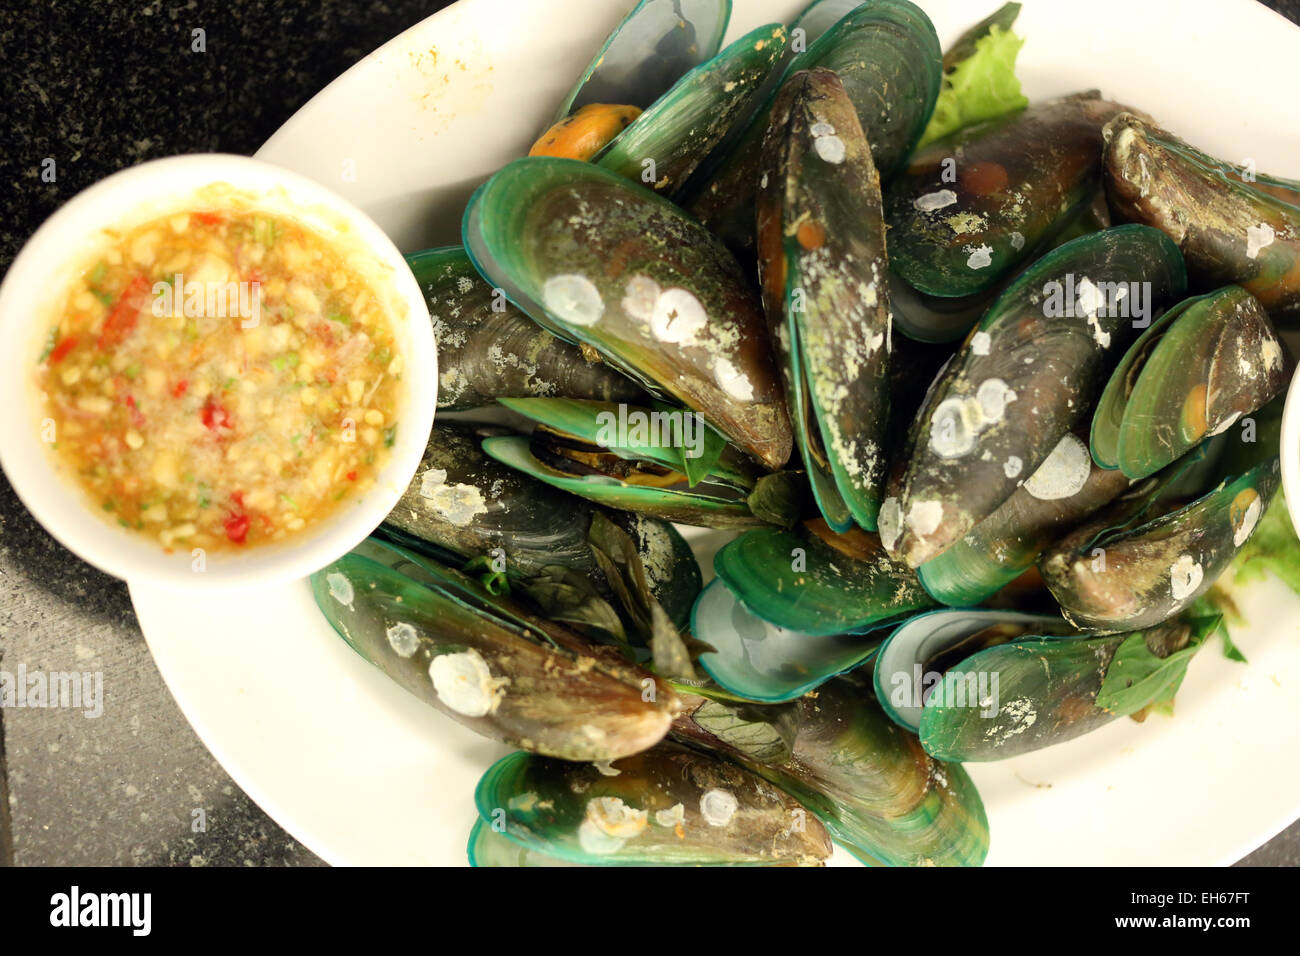 Boiled mussels on white dish in a restaurant. Stock Photo